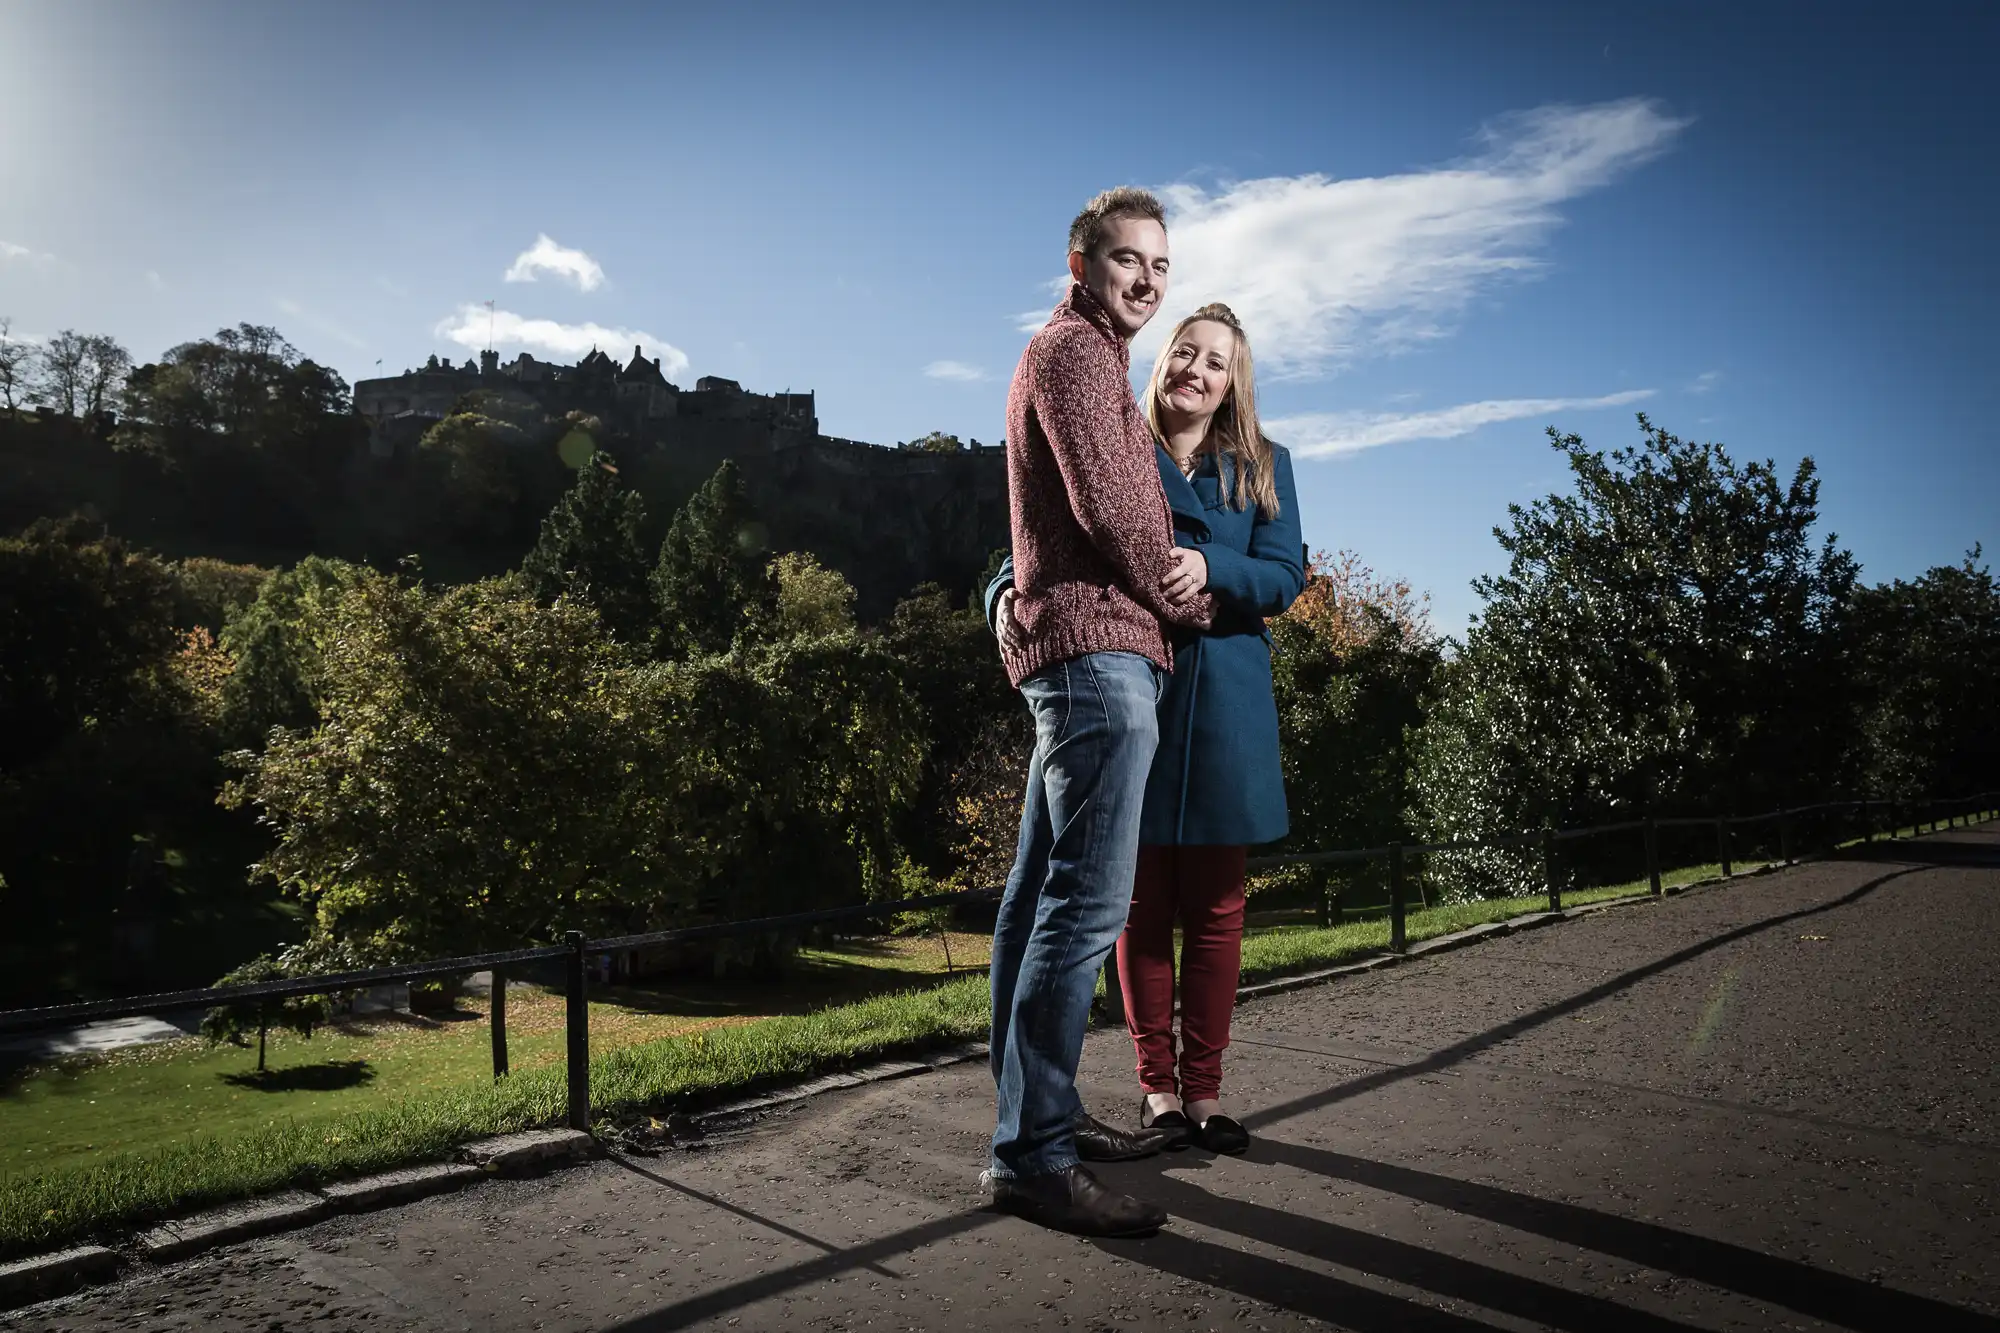 A couple embracing and smiling on a pathway, with a castle on a hill in the background and lush greenery under a bright sky.